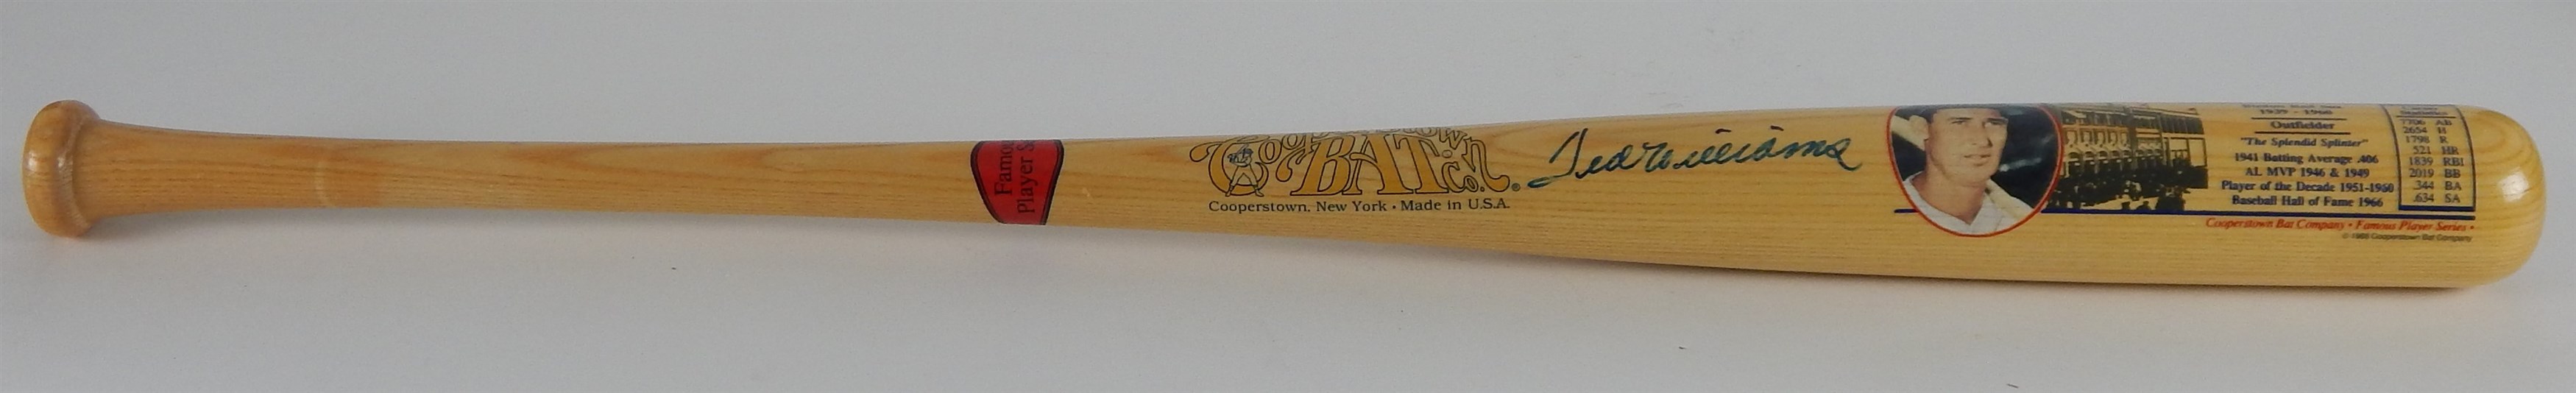 Baseball Autographs - Ted Williams Signed Cooperstown Bat